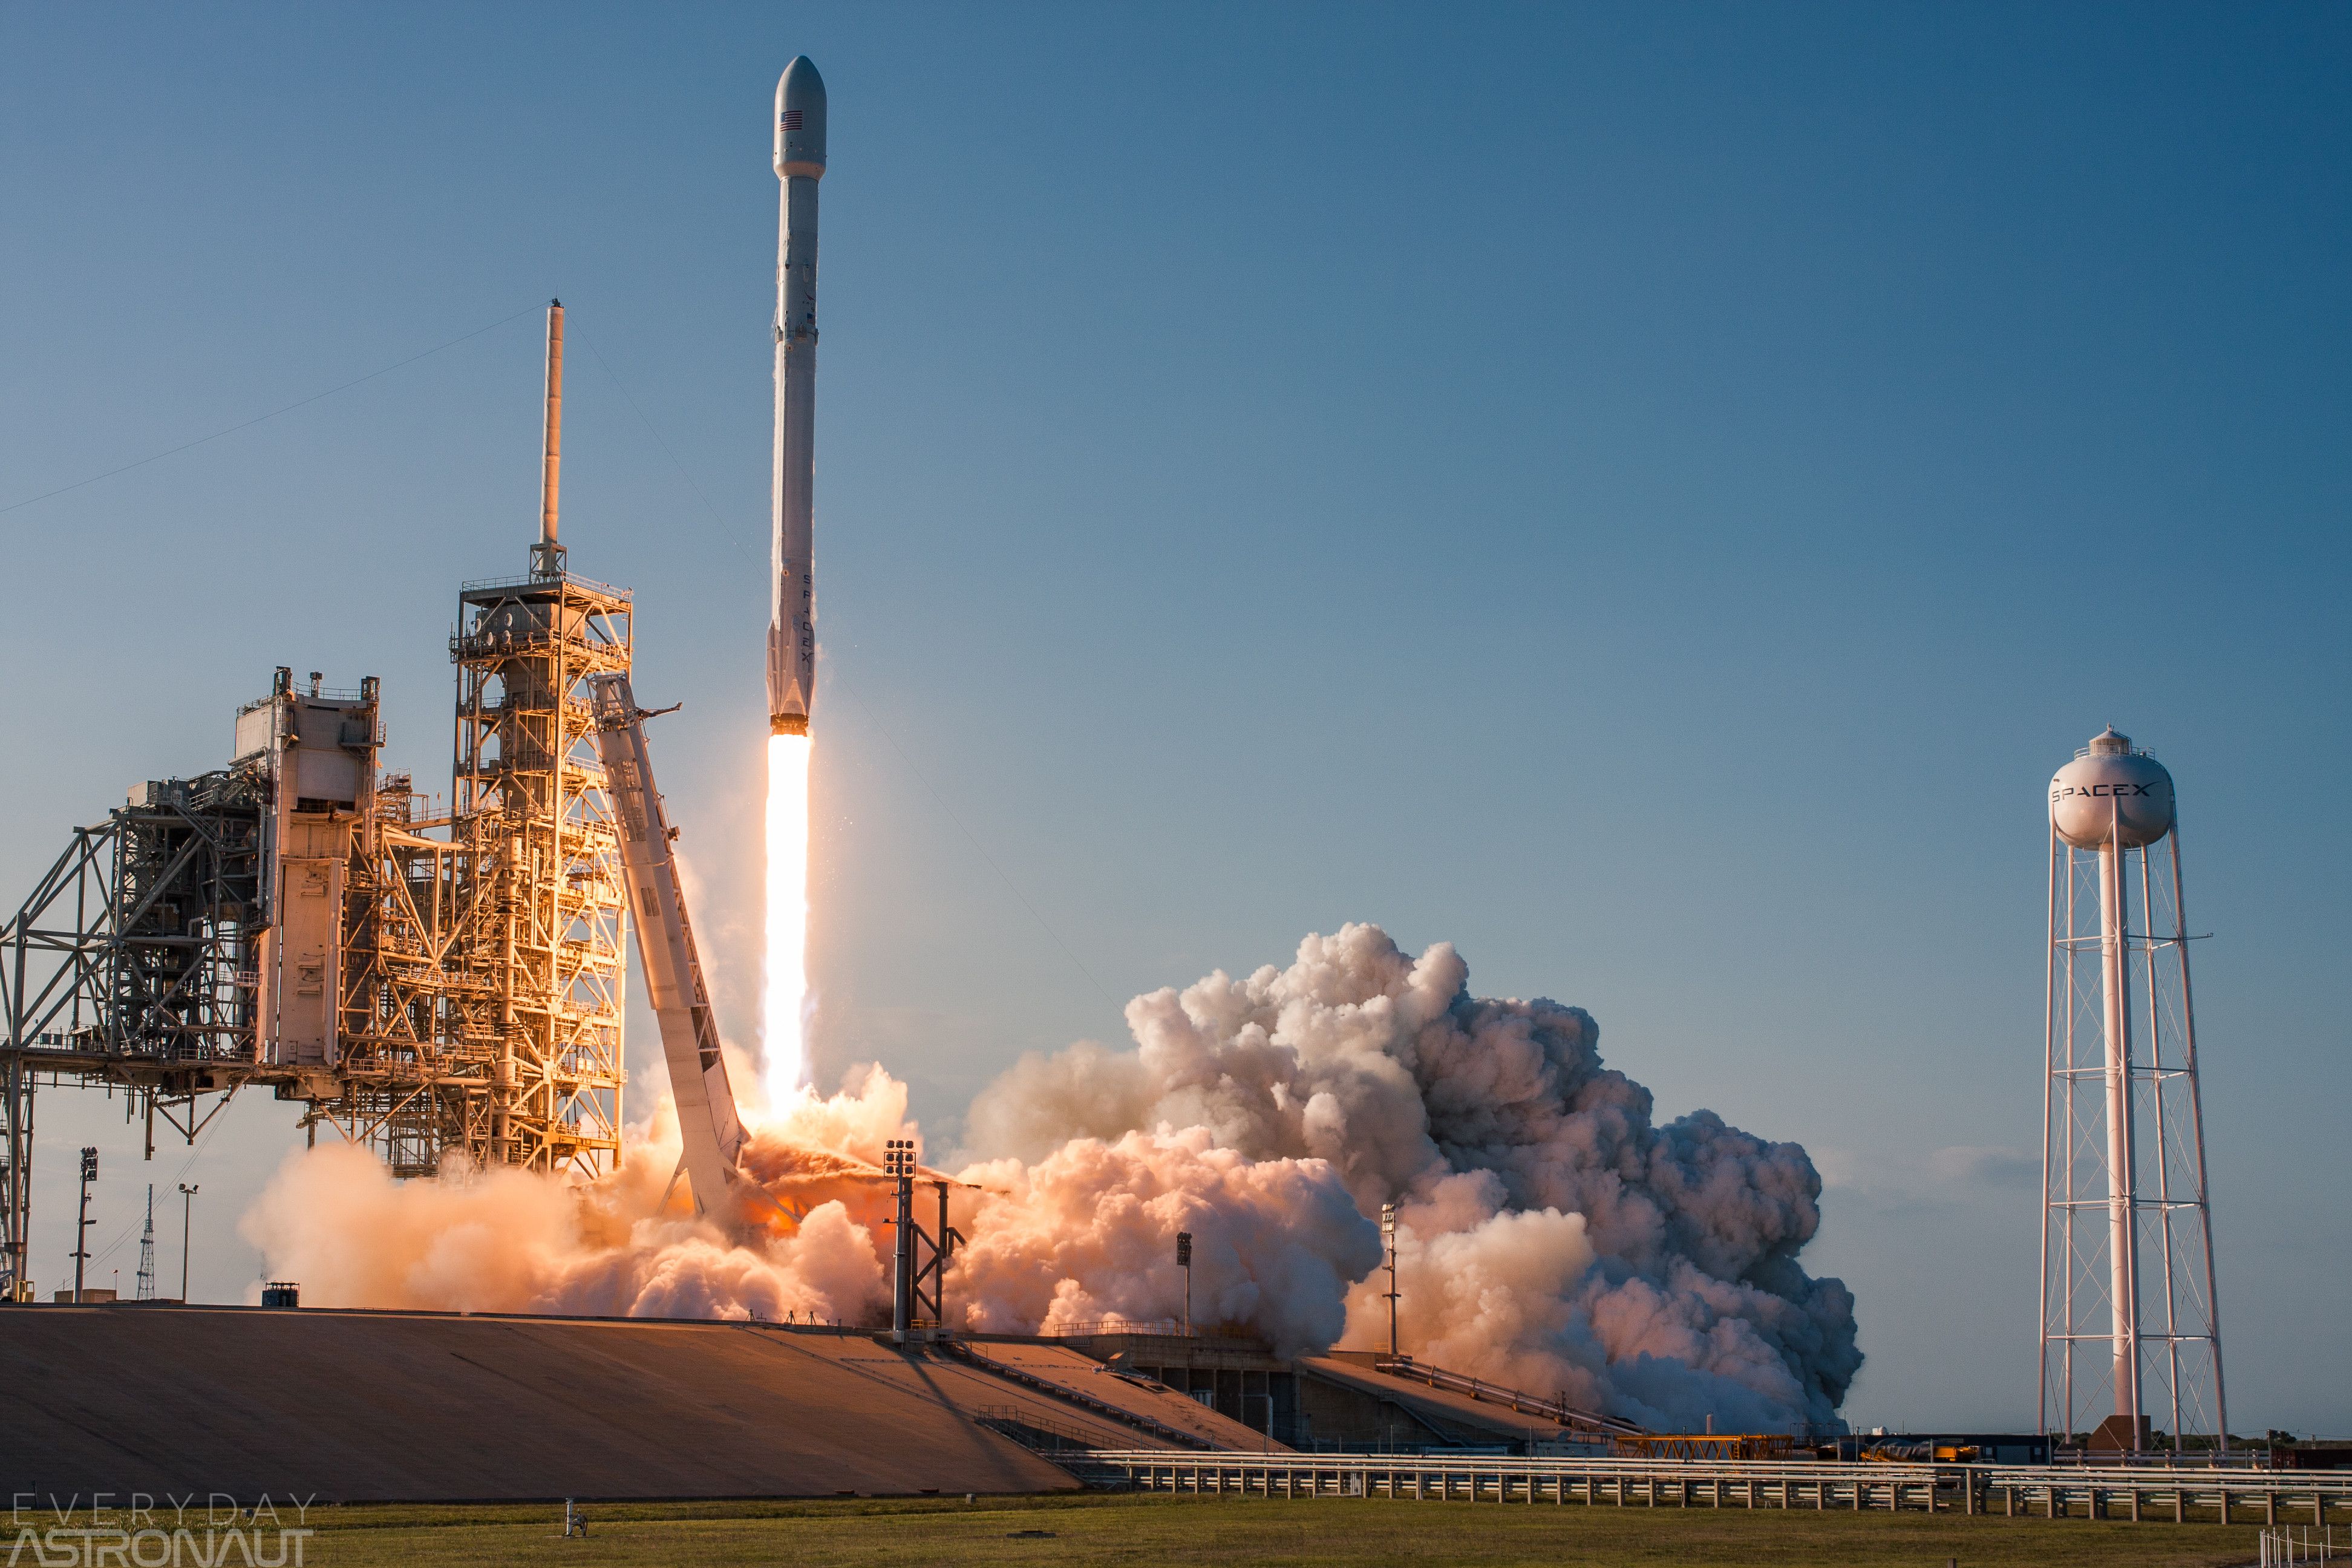 INTERESTING PHOTO OF THE DAY: SPACEX'S FIRST REUSED ROCKET LAUNCH